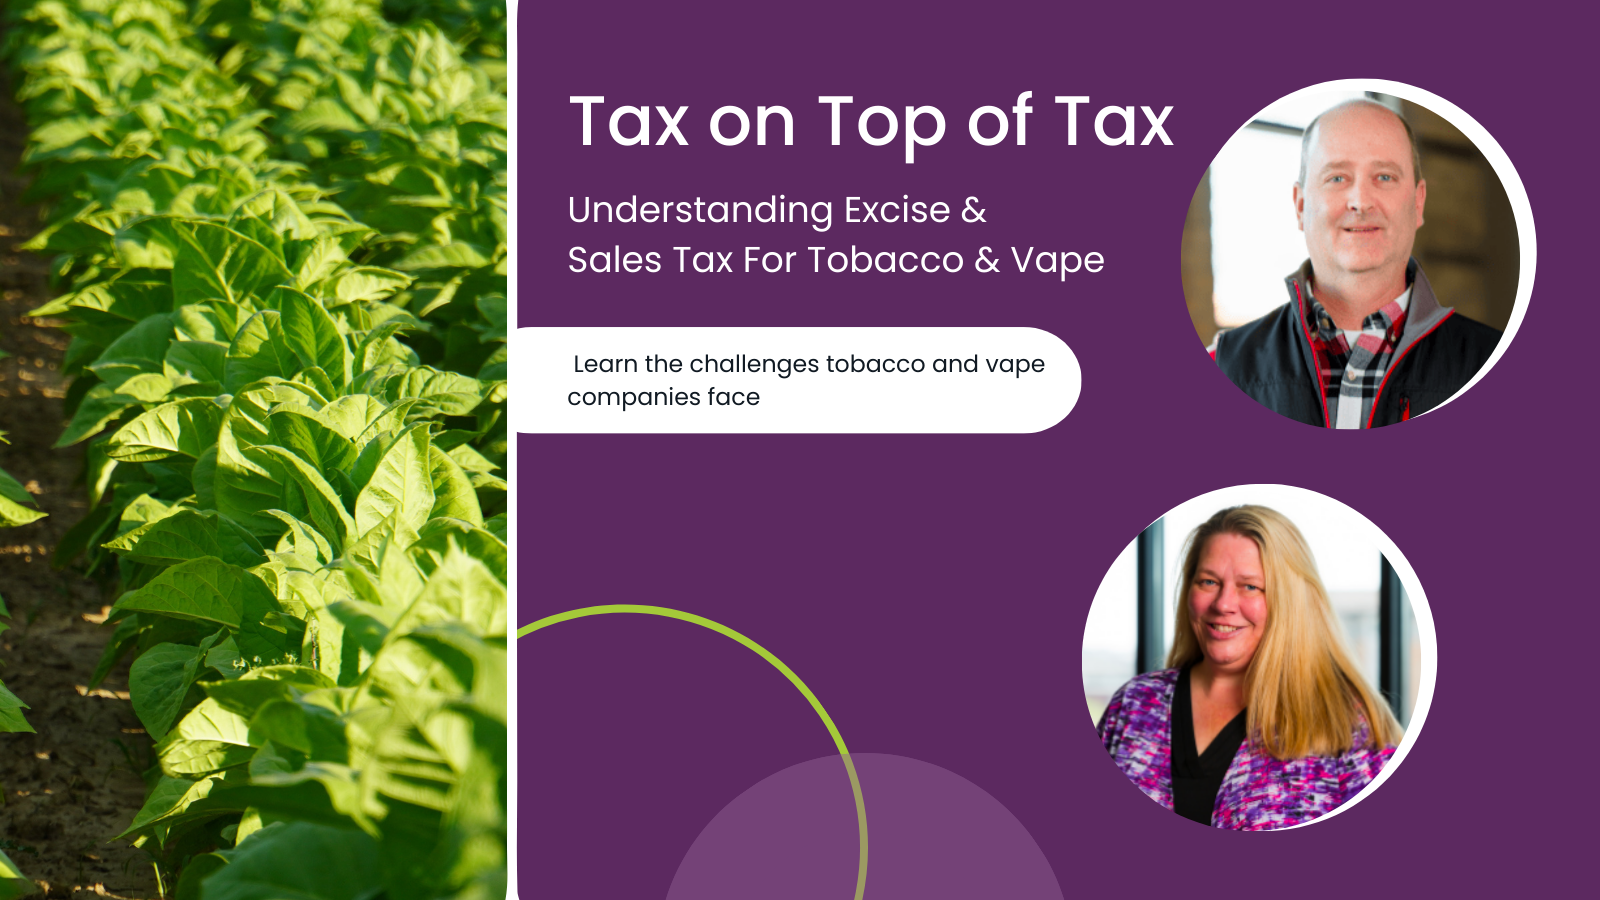 Understanding Excise & Sales Tax For Tobacco & Vape